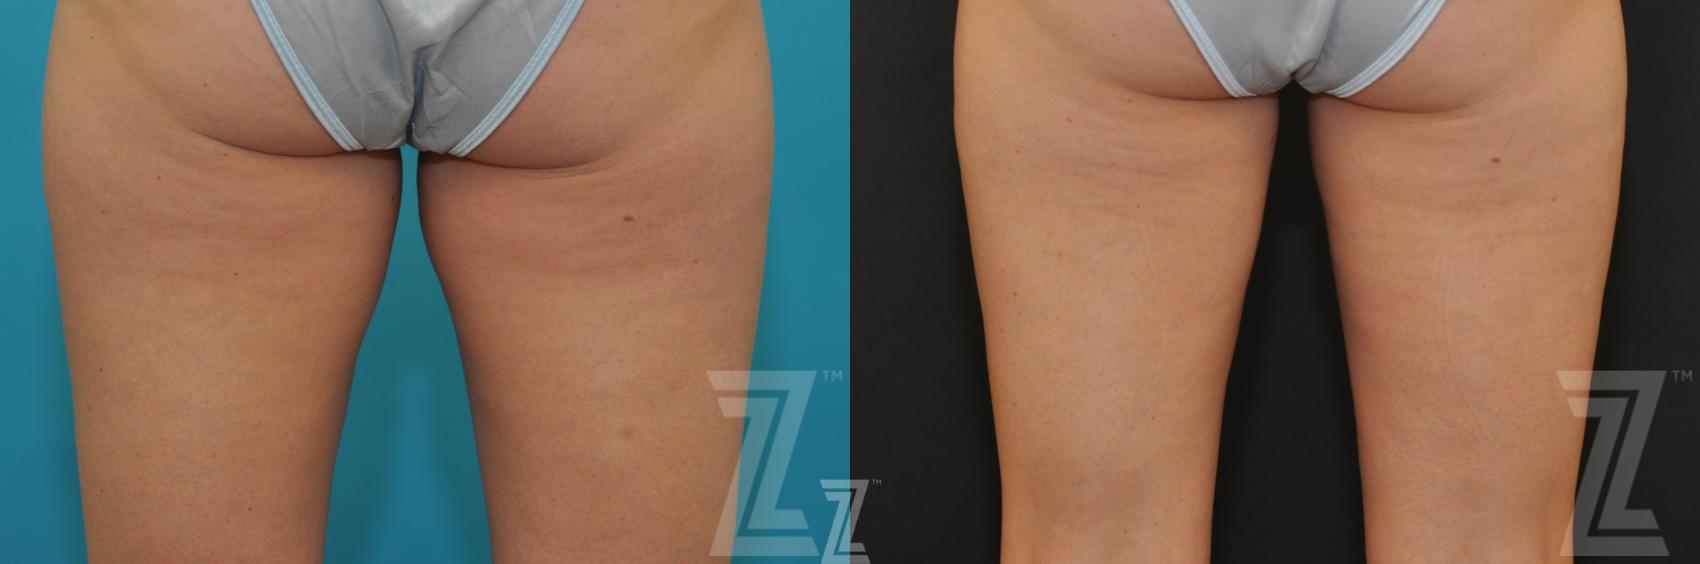 CoolSculpting® Before & After Photo | Austin, TX | The Piazza Center for Plastic Surgery & Advanced Skin Care